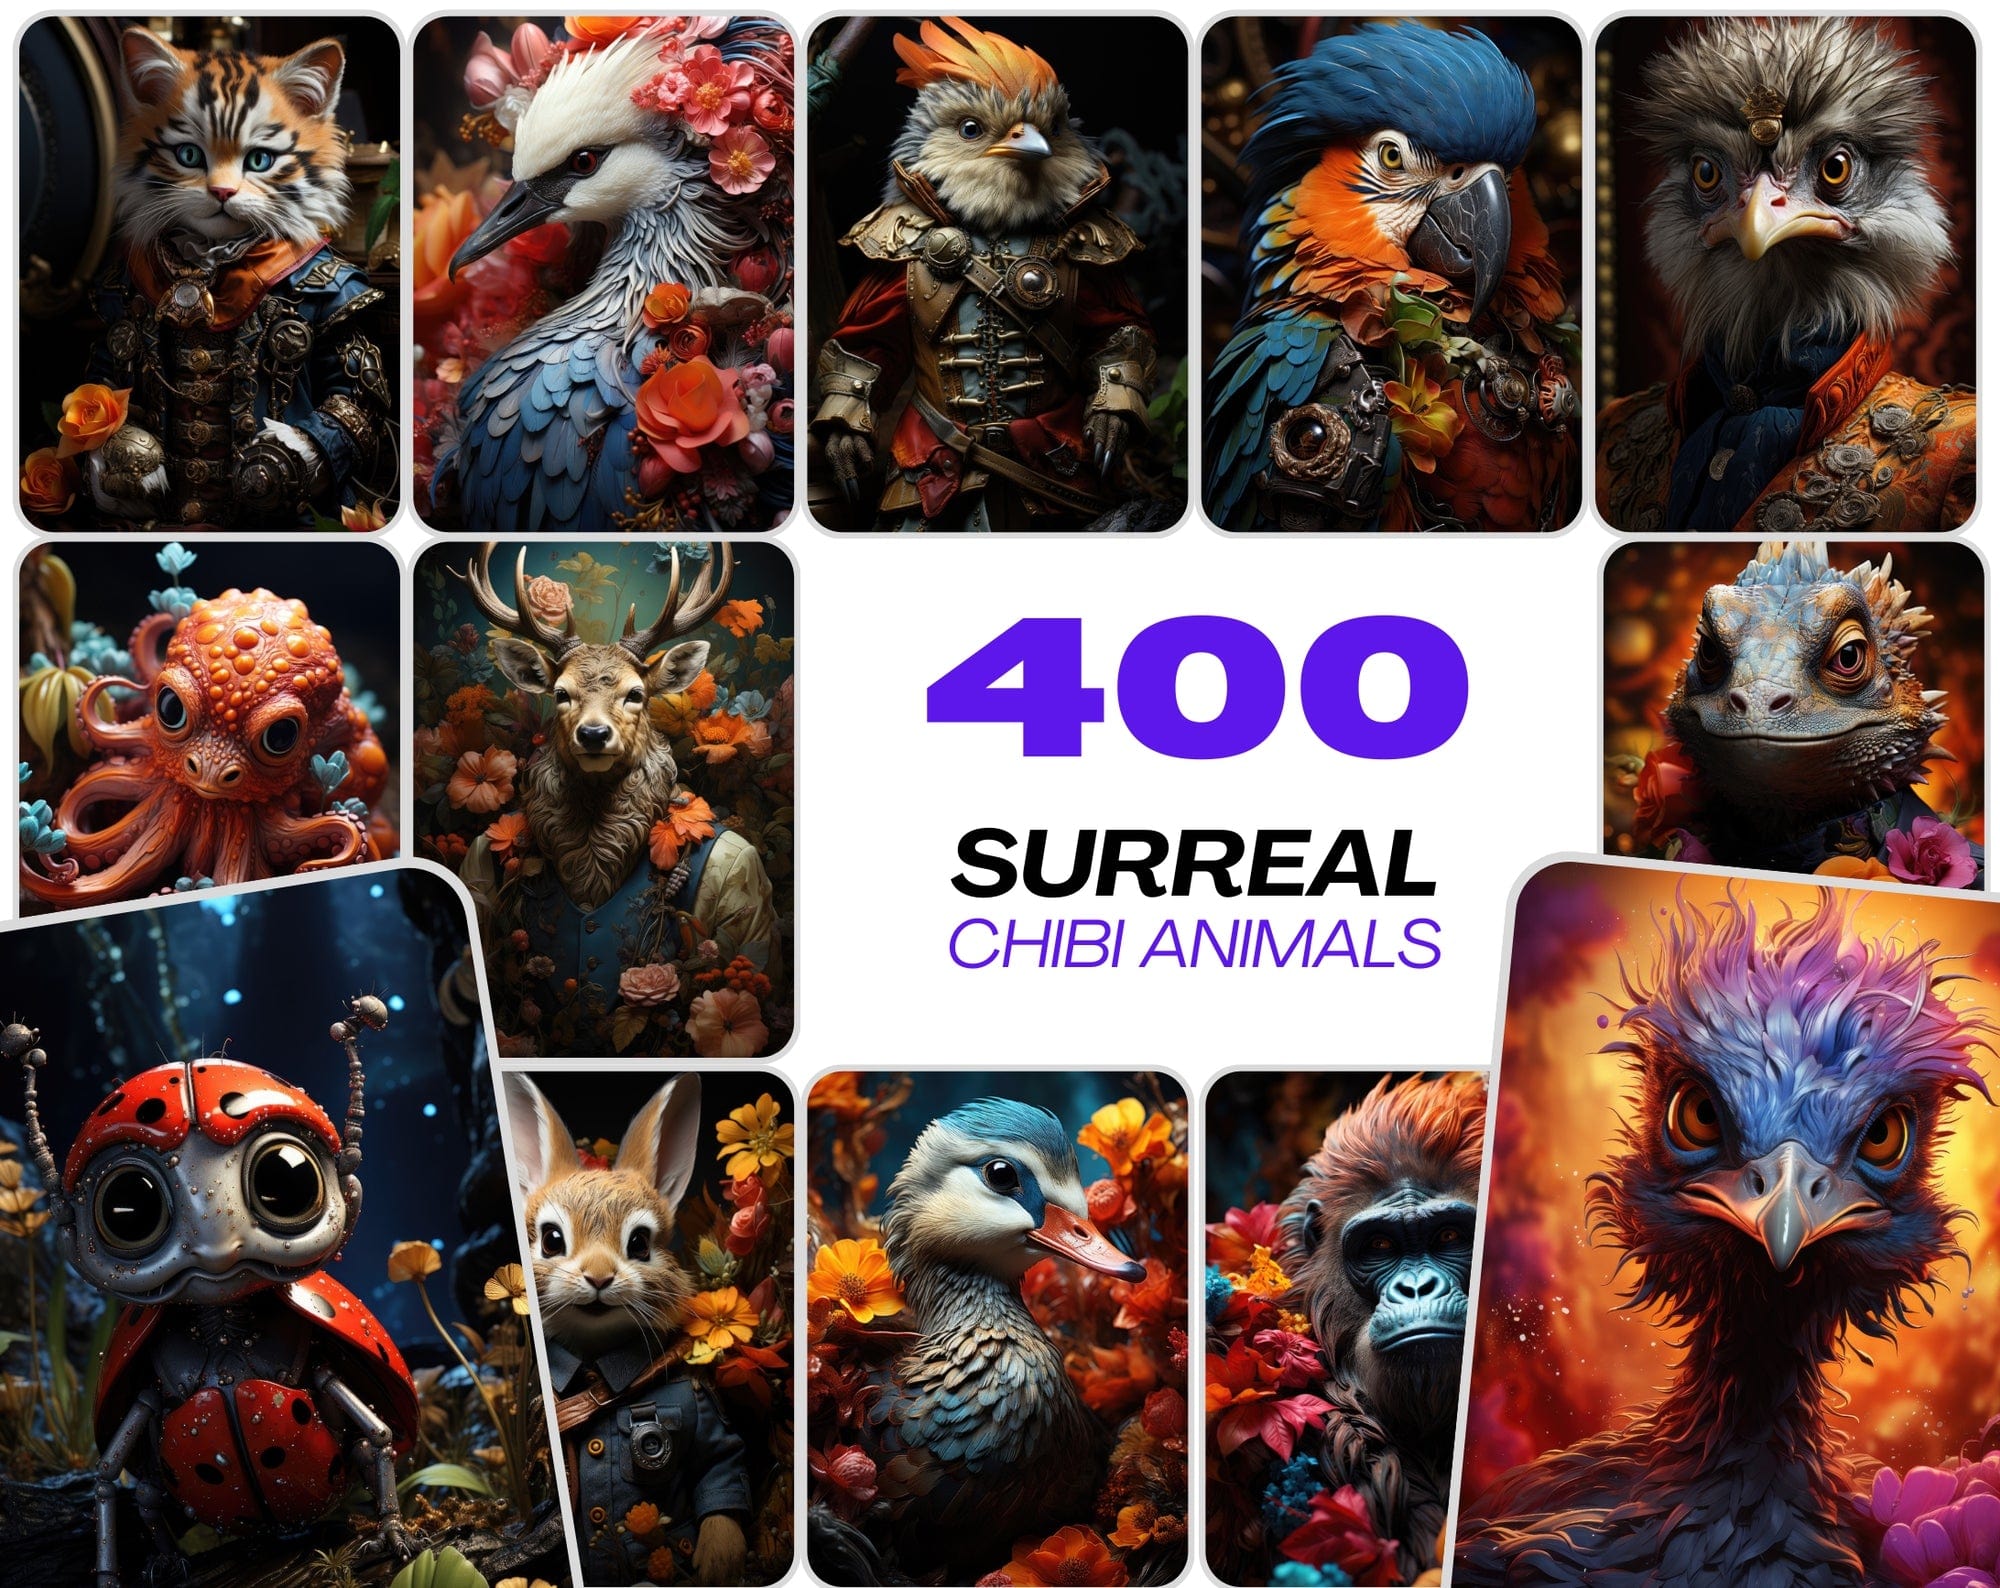 Surreal Chibi Style Animal Clipart - 400 High-Resolution JPGs, Commercial License Included Digital Download Sumobundle